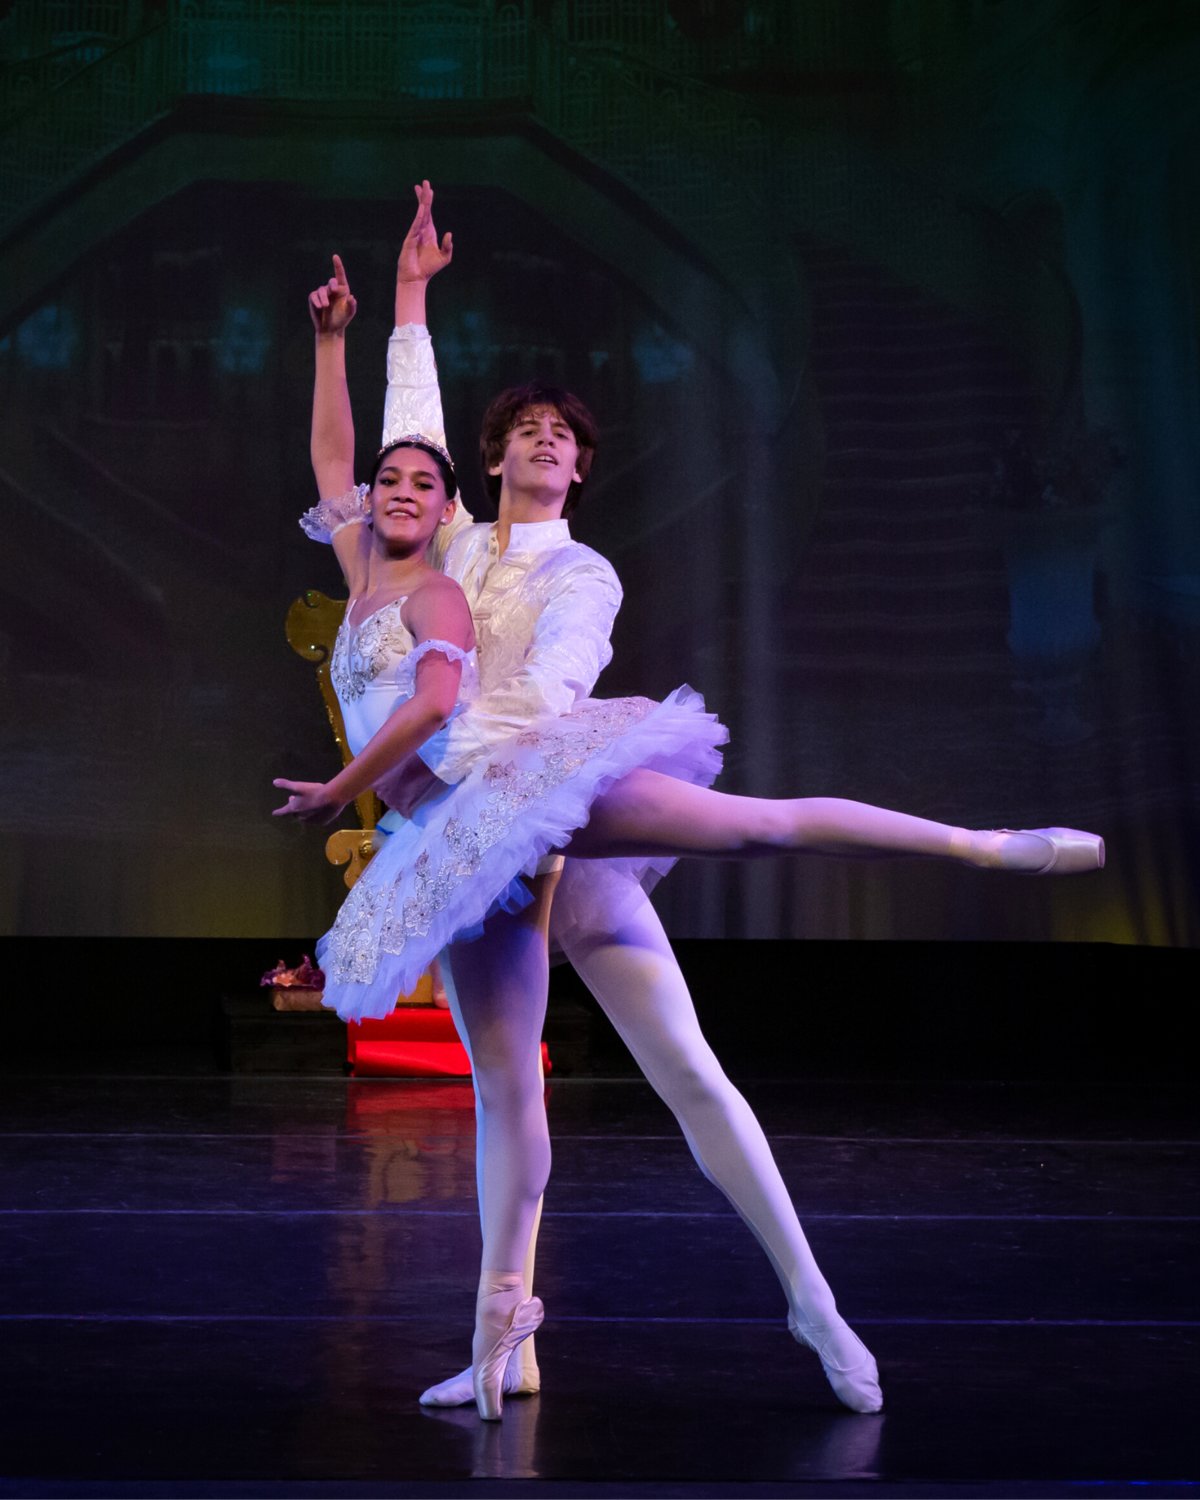 Claudia Mueckay and Jake Karger dance the roles of Sugar Plum Fairy and Cavalier.